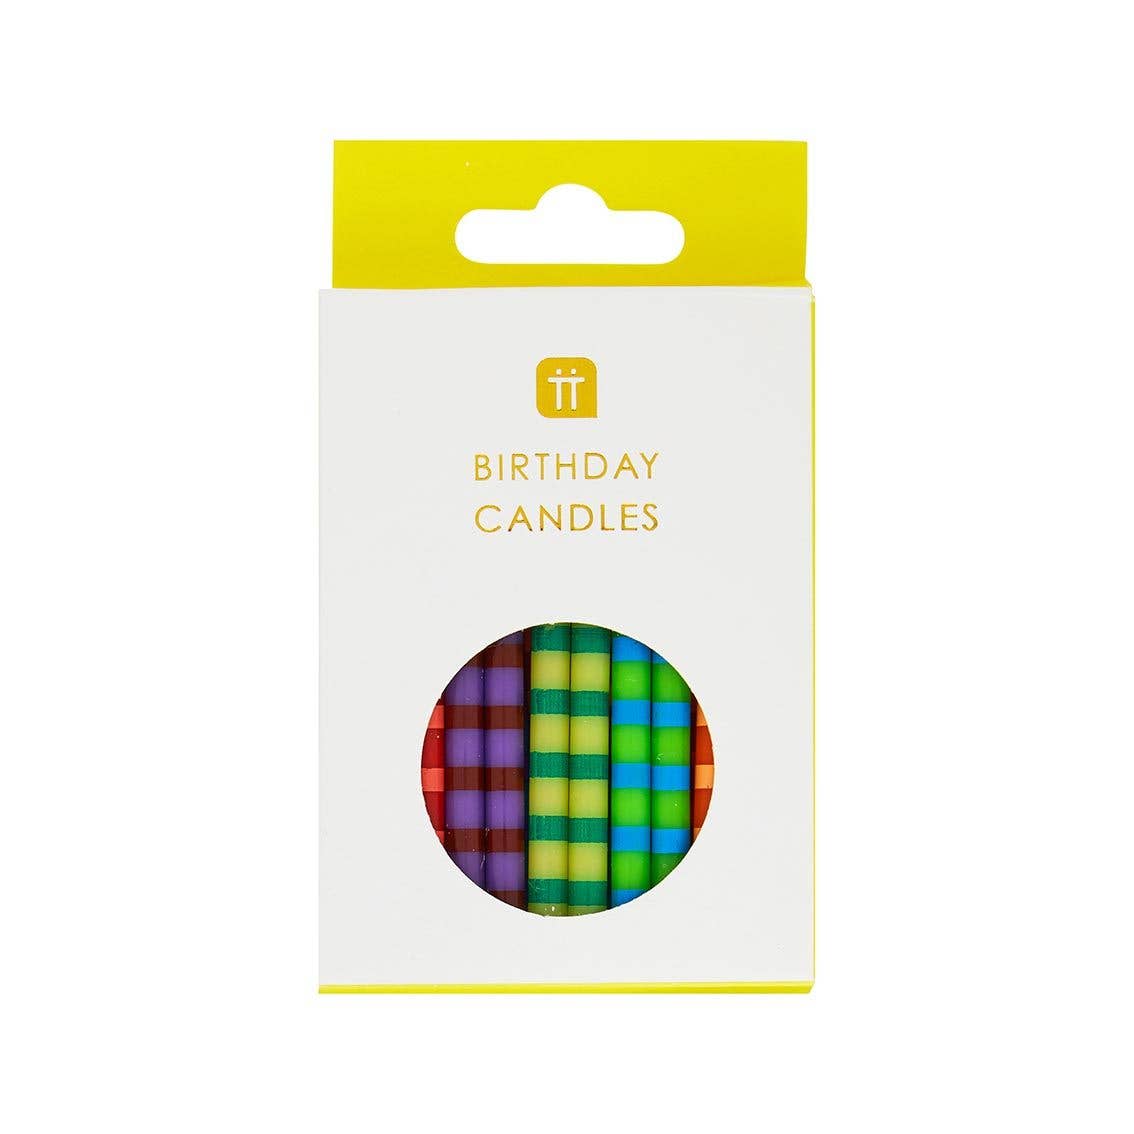 Striped Birthday Candles - 24 Pack -  - Who said